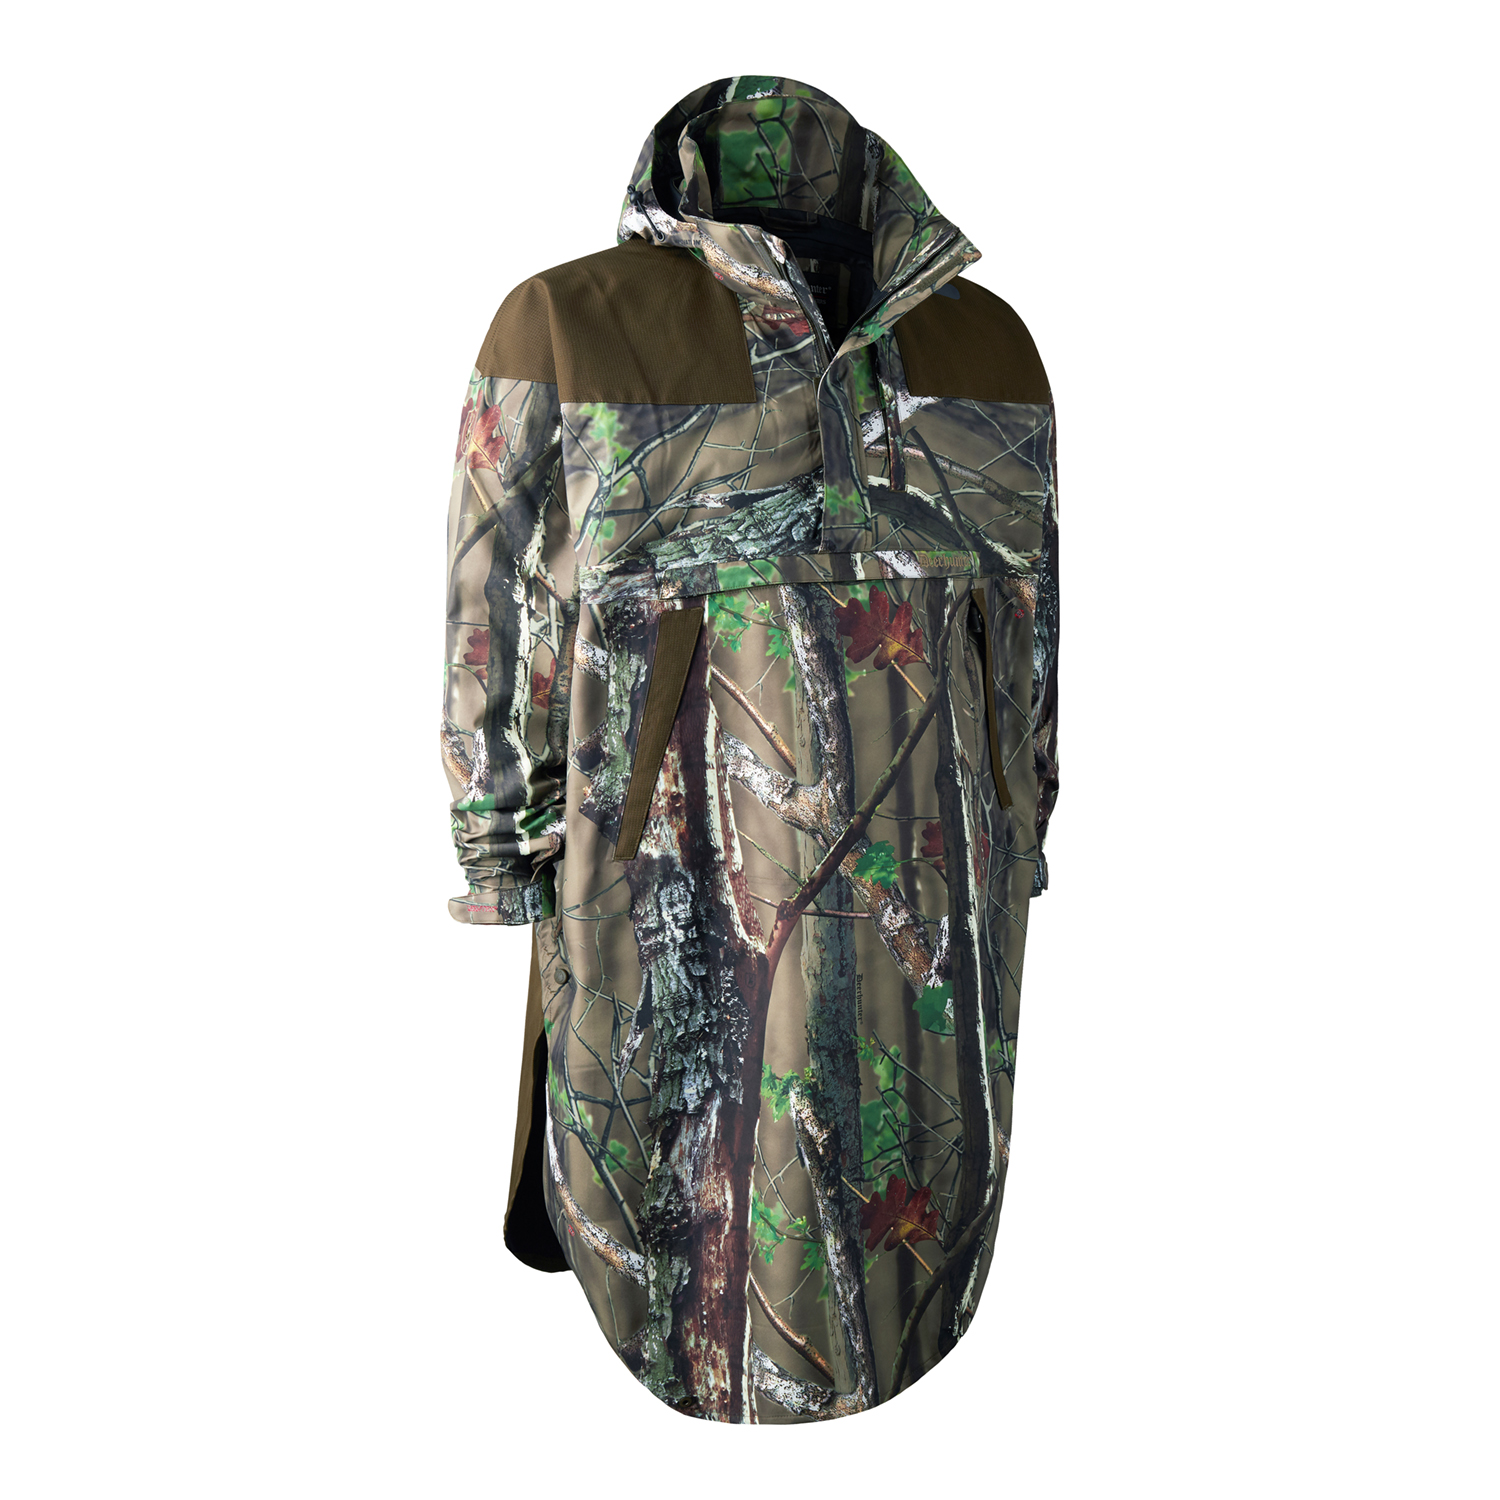 Track regn anorak - Innovation GH Camouflage - 3XL thumbnail